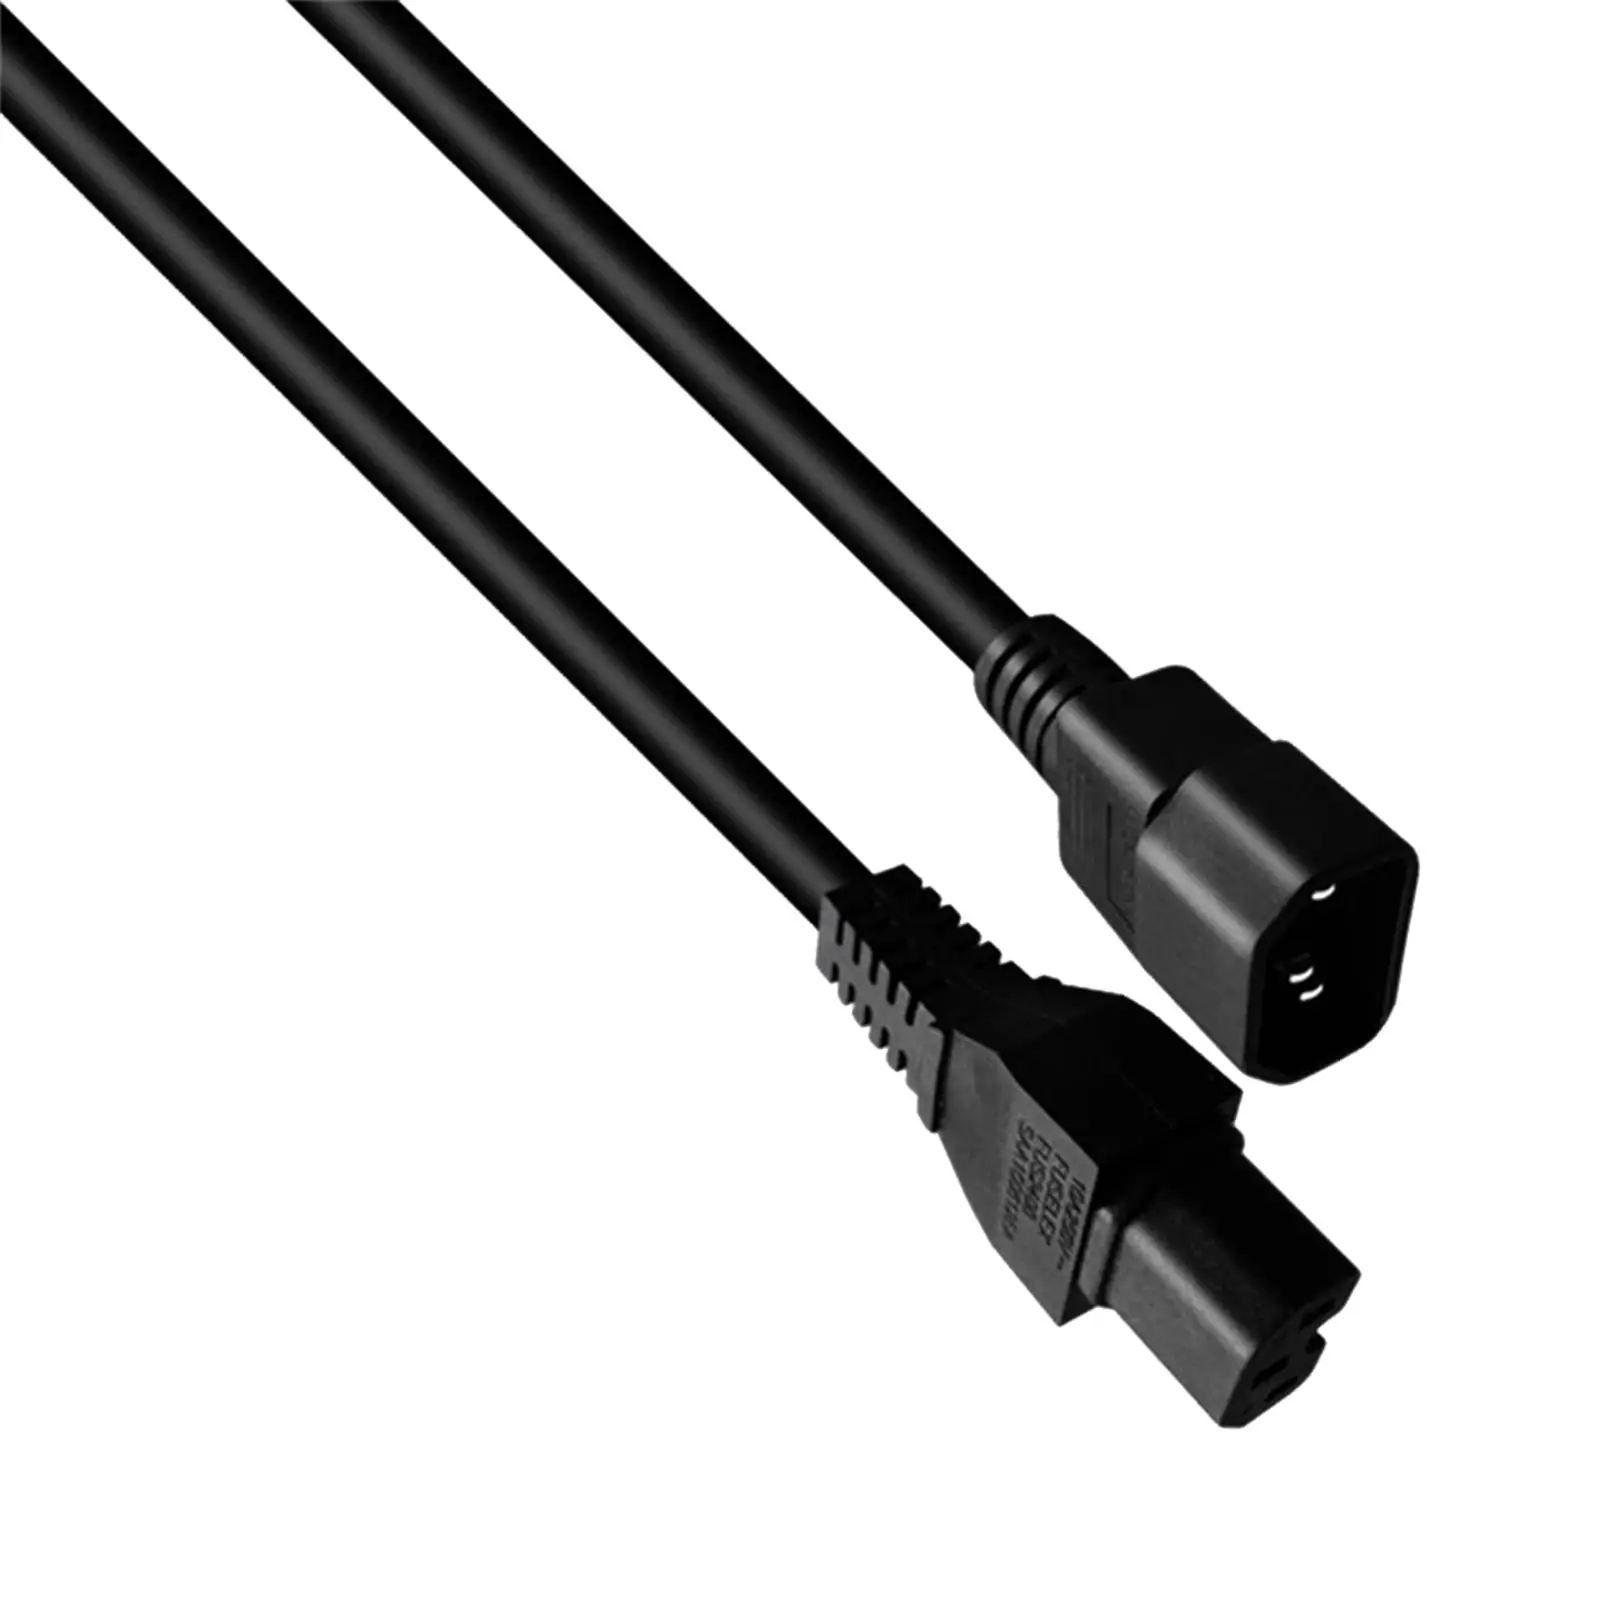 IEC320-C14 to IEC320-C15 Extension Power Cord Low Resistance for Replacement